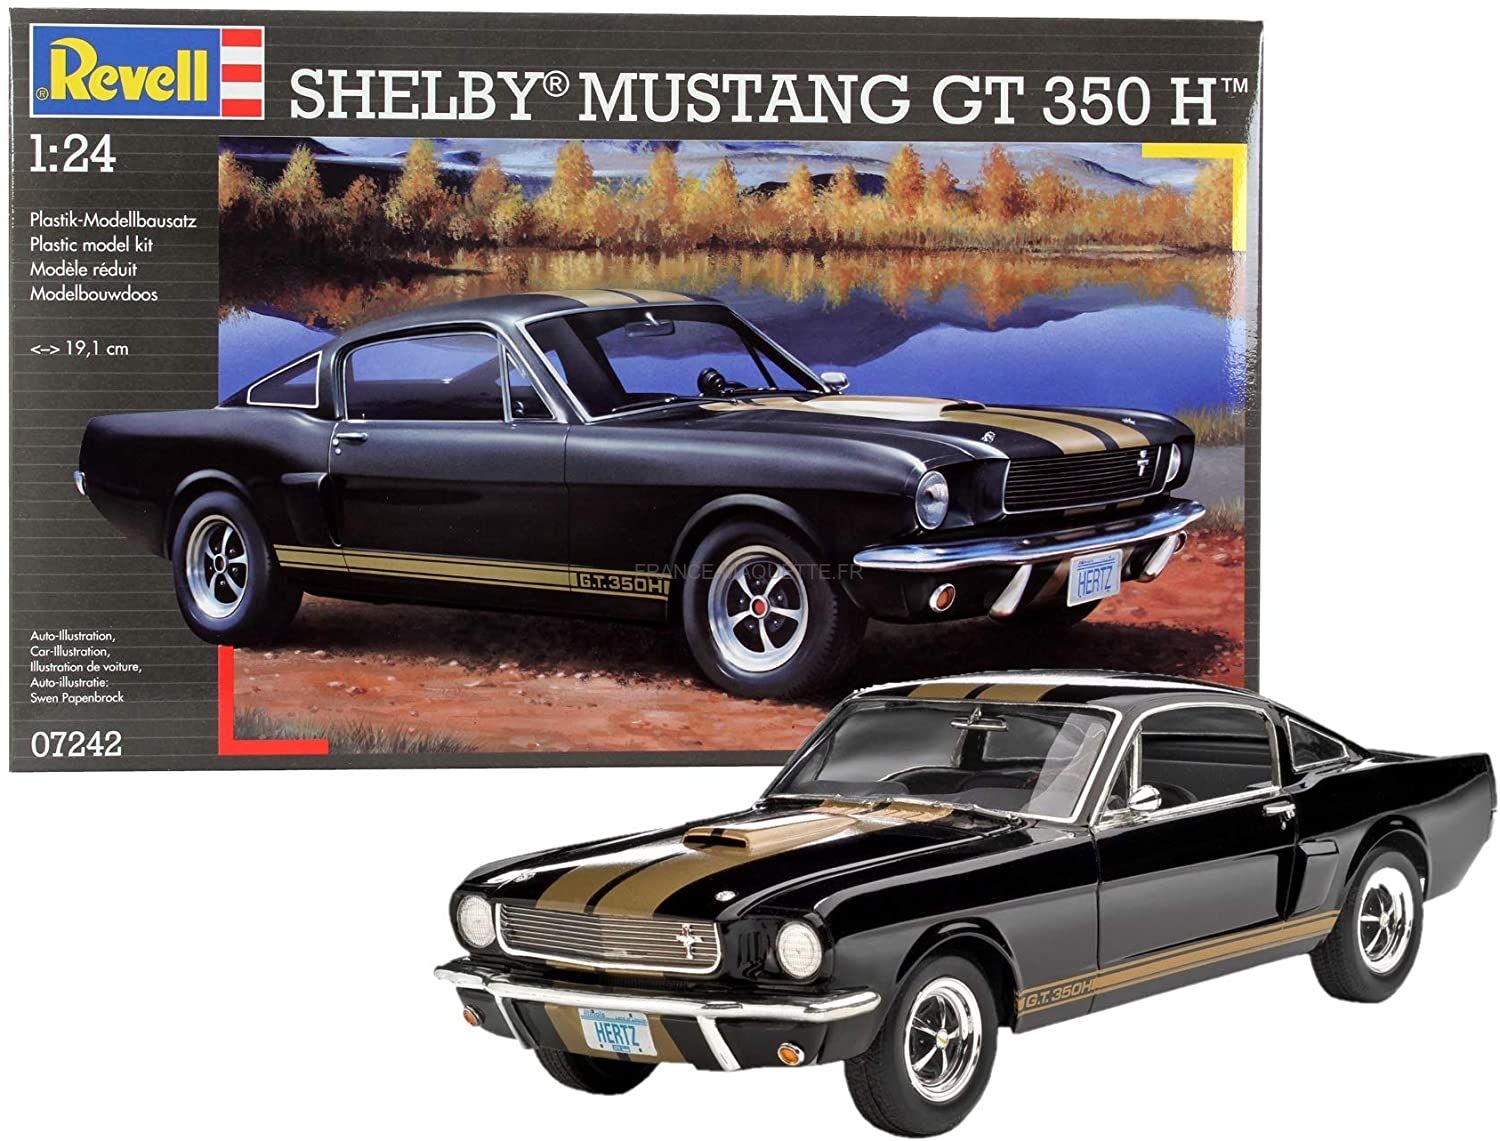 Revell 7242, 07242 Maquette de Voiture Shelby Mustang